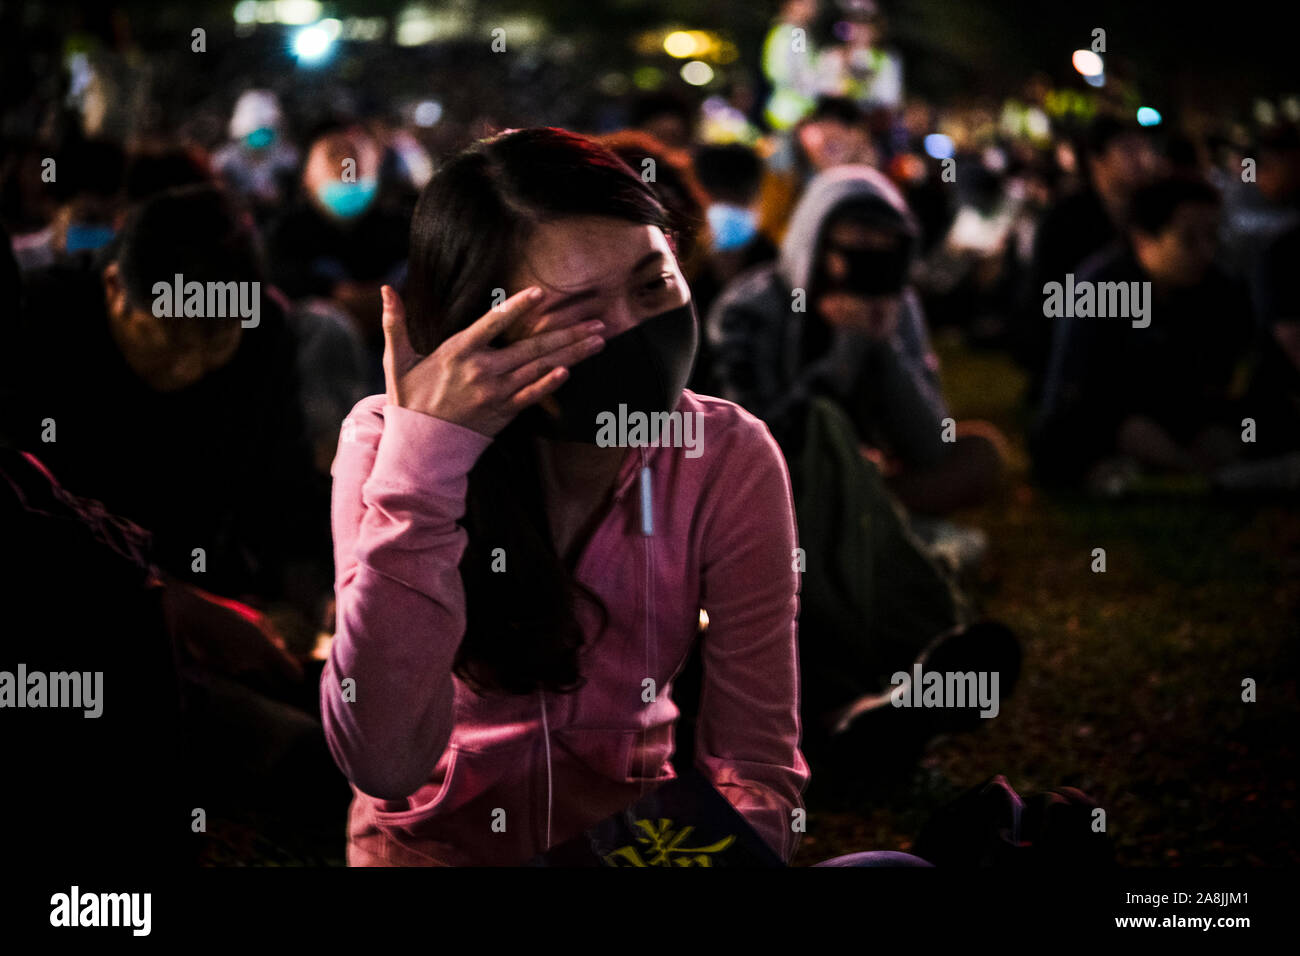 A woman in grief during the rally.Memorial rally at Tamar Park in Hong Kong to mourn the death of a 22 years old university student, Alex Chow Tsz Lok who died from a serious brain injury during a fall on November 4th as police skirmished with demonstrators last weekend. He was left in critical condition and died after suffering a cardiac arrest. Stock Photo